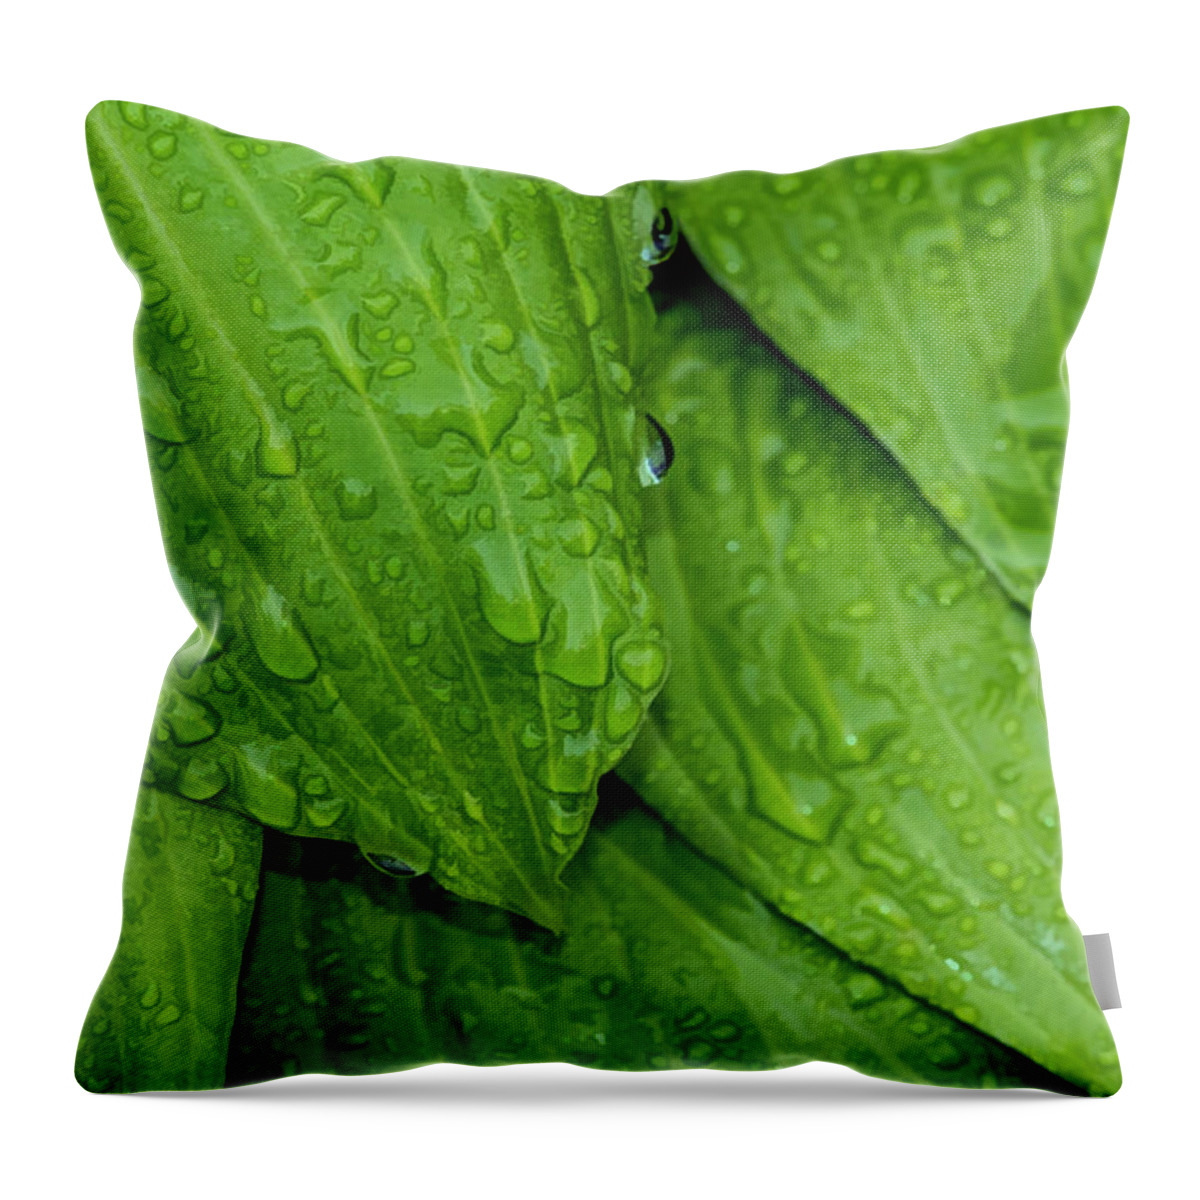 Raindrops Throw Pillow featuring the photograph Drops On Green by Cathy Kovarik